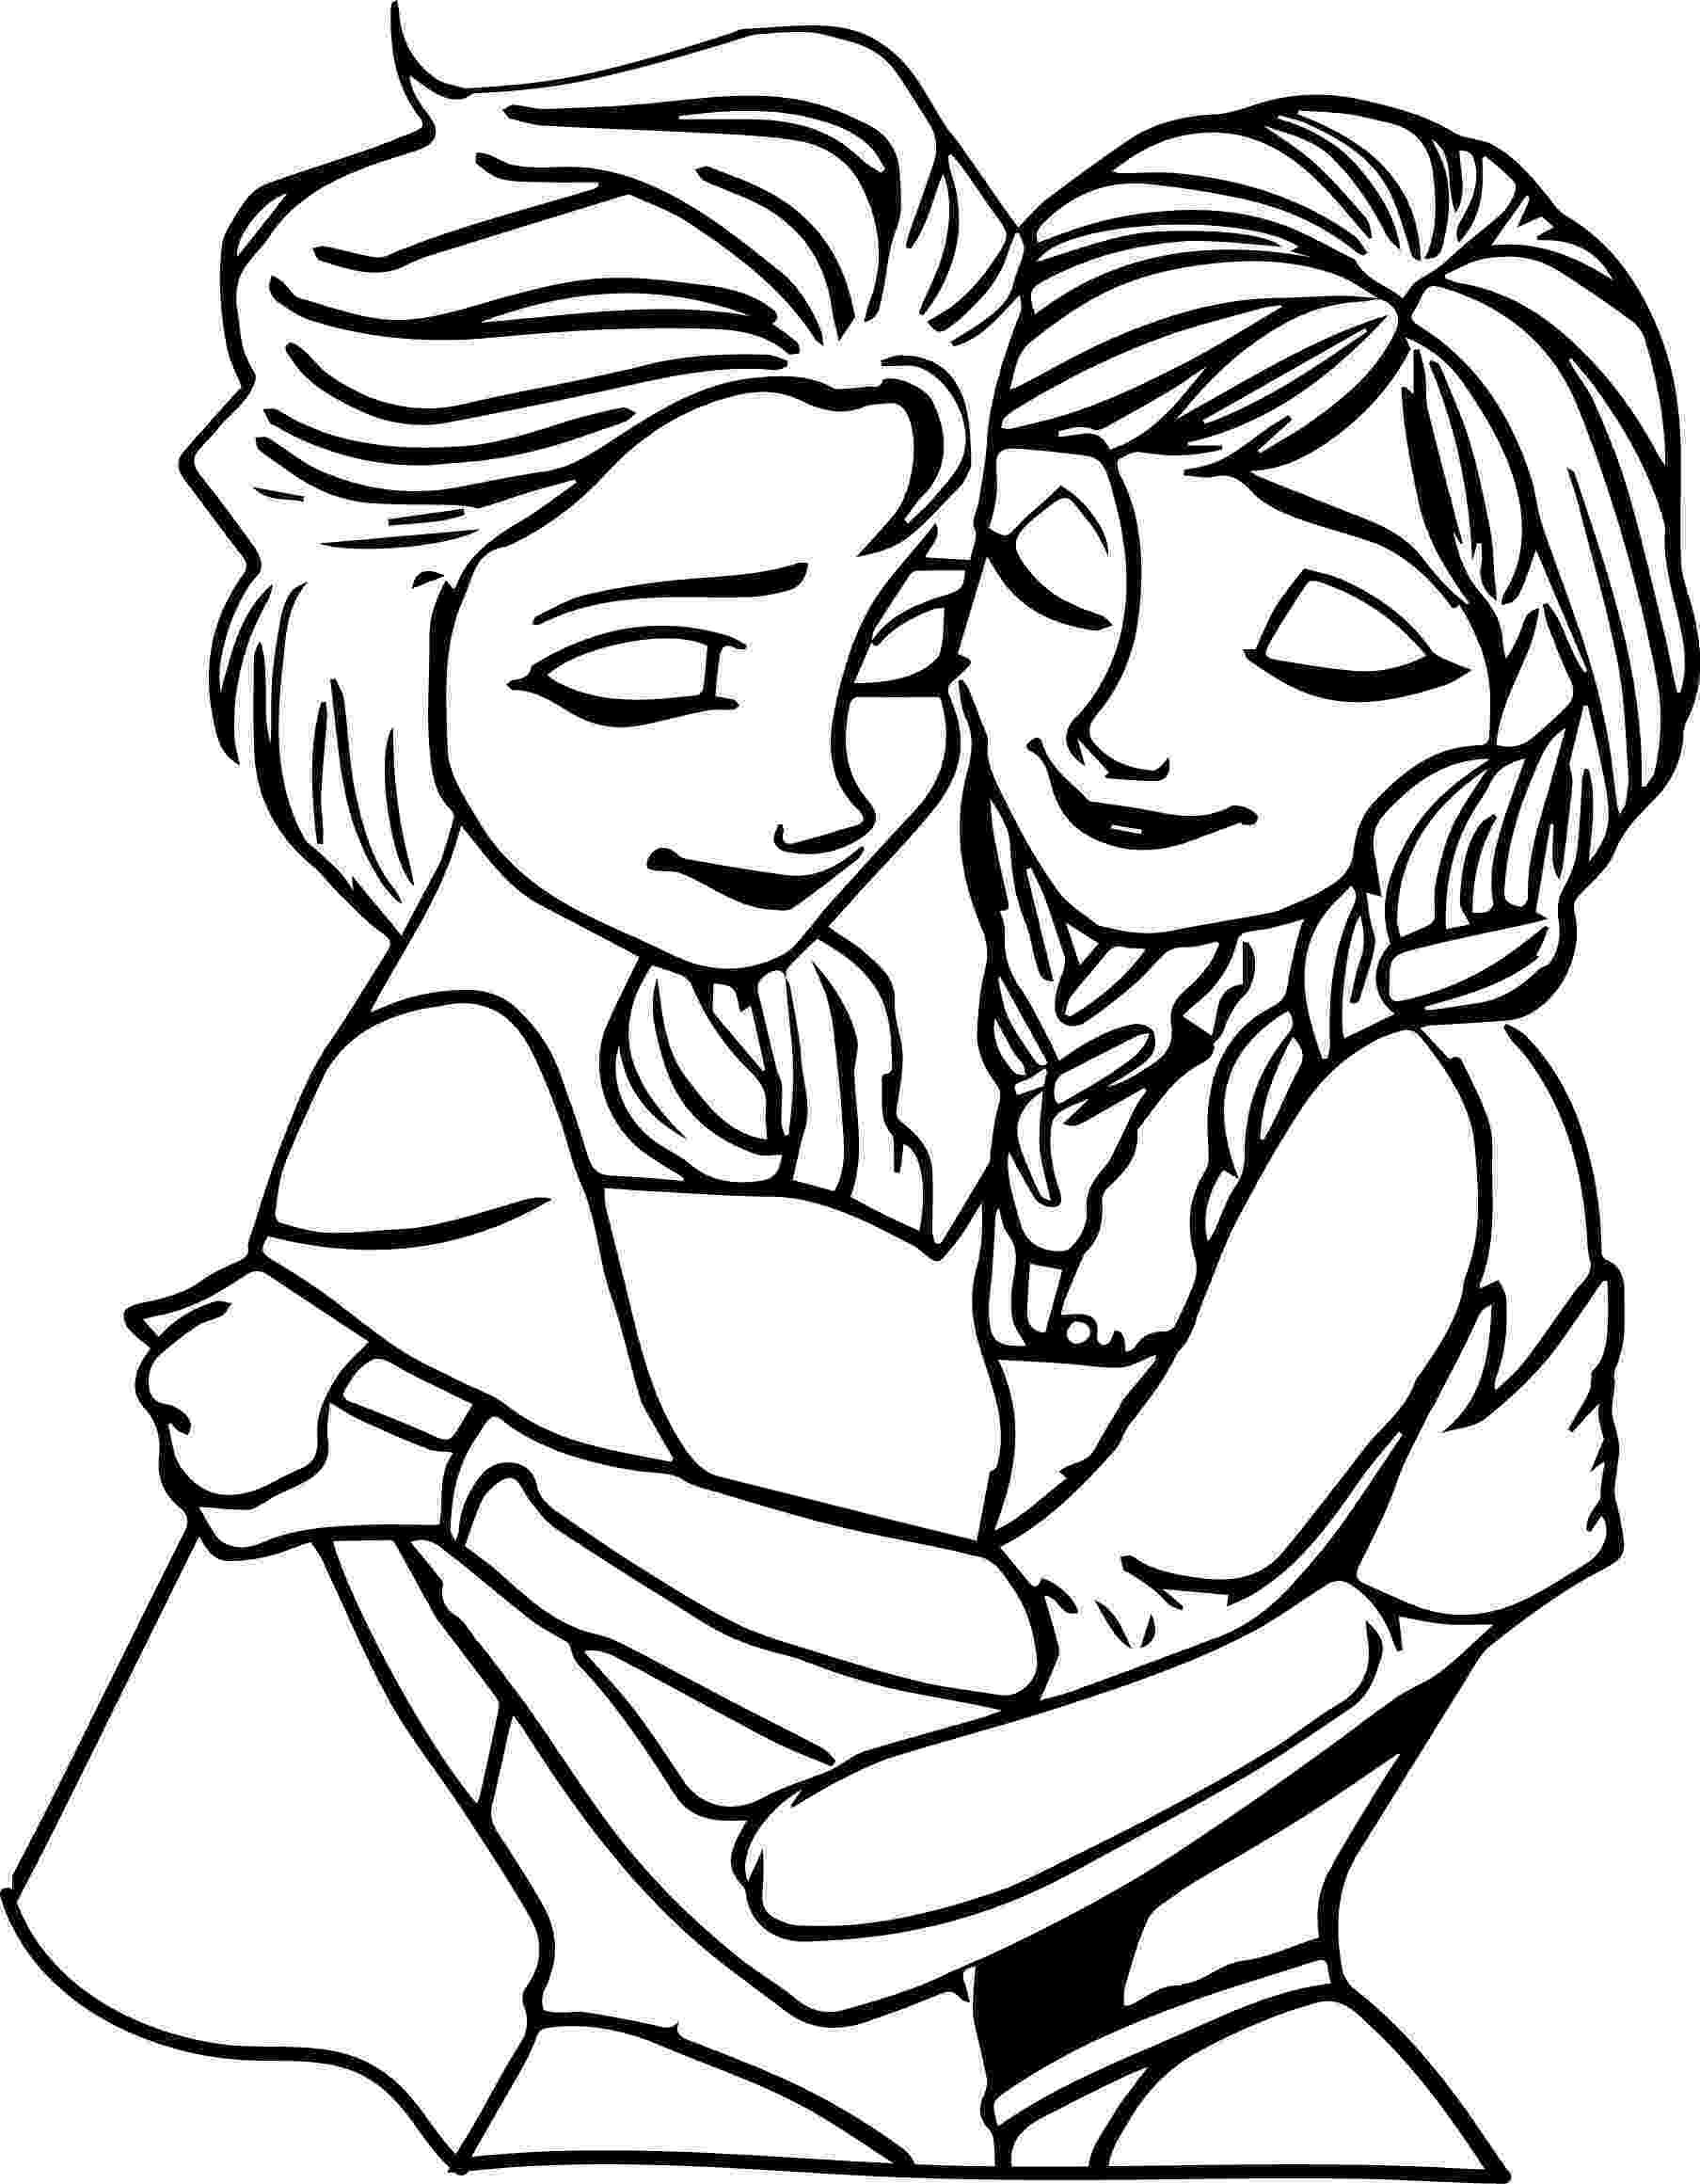 free coloring pages elsa and anna elsa coloring pages free download best elsa coloring and pages coloring free anna elsa 